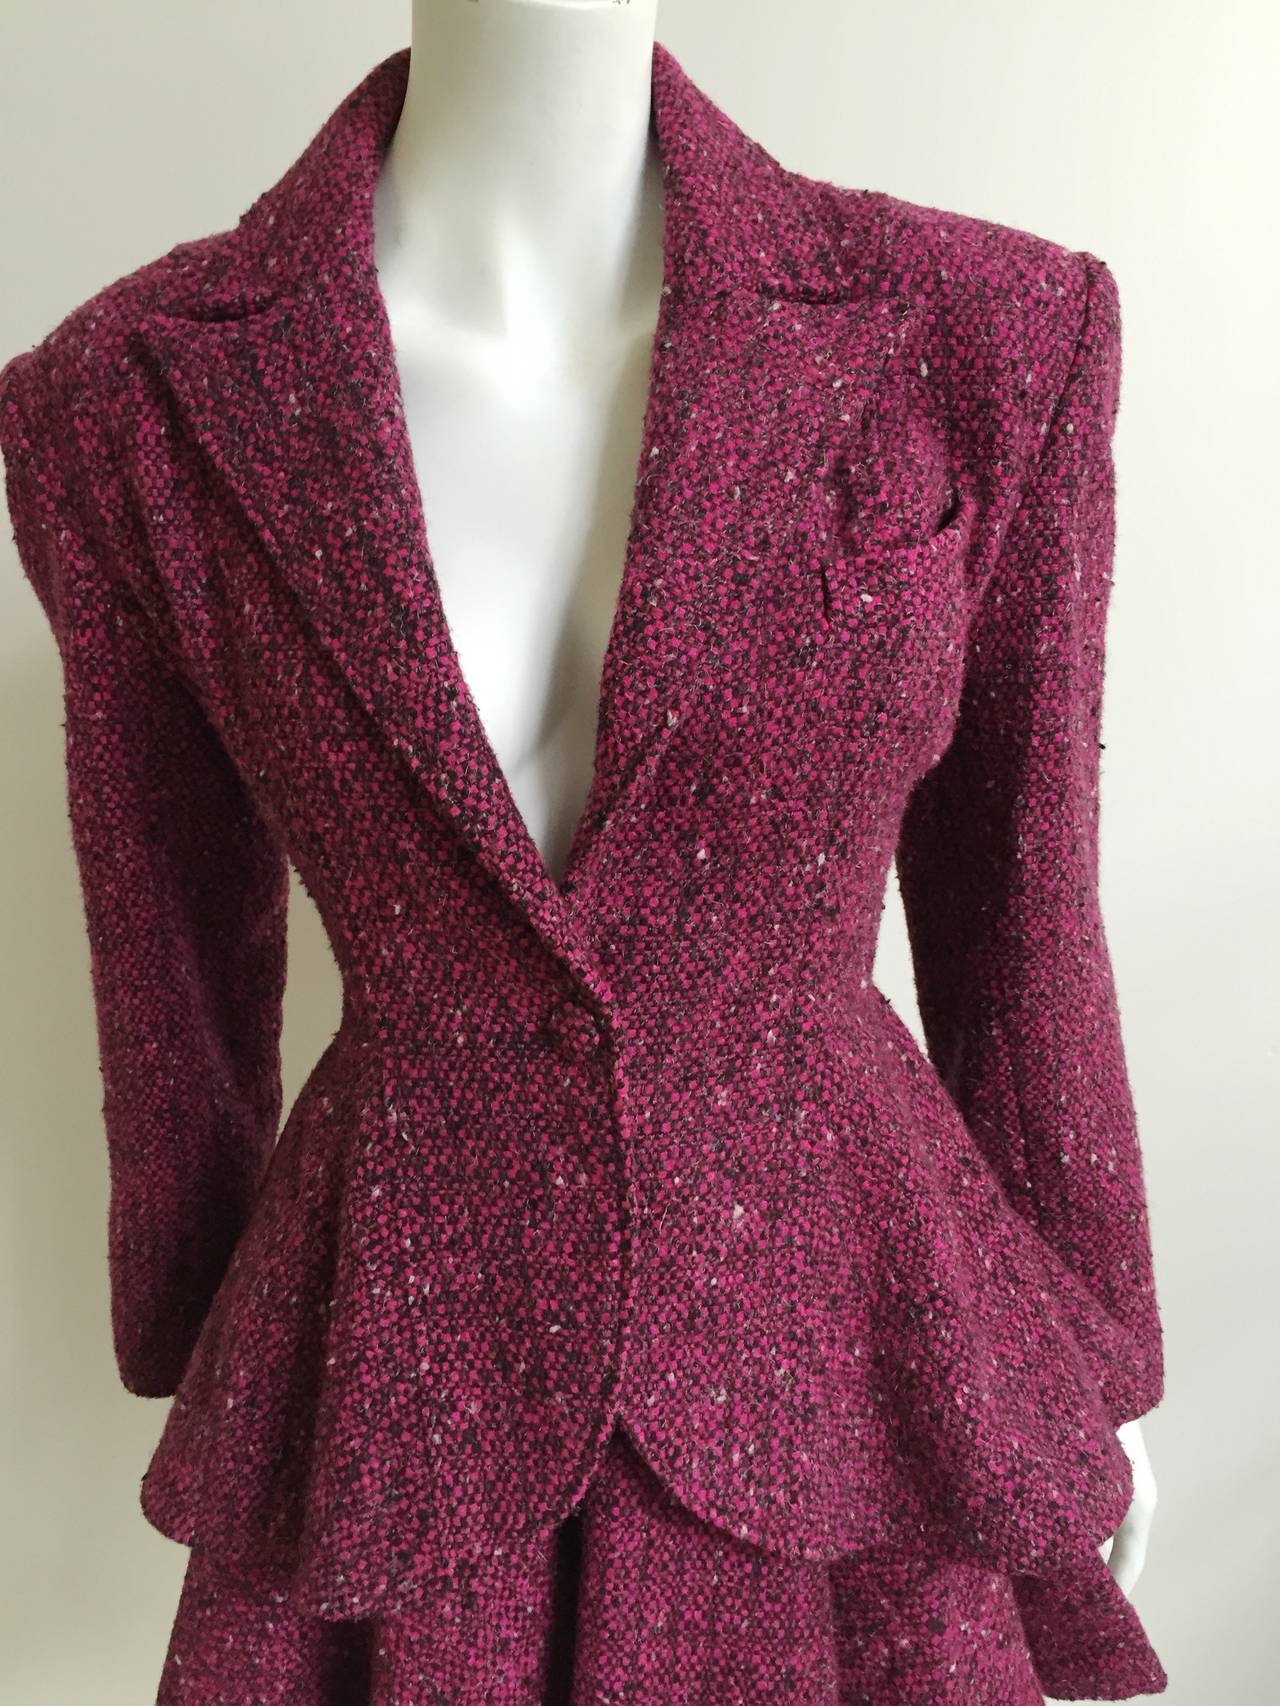 Patrick Kelly Paris 1988 skirt tweed suit size 4 ( Please see & use measurements to measure your body). This is from the private collection of long time friend & model Carol Martin of Atlanta. This was a gift from Patrick Kelly himself to Carol